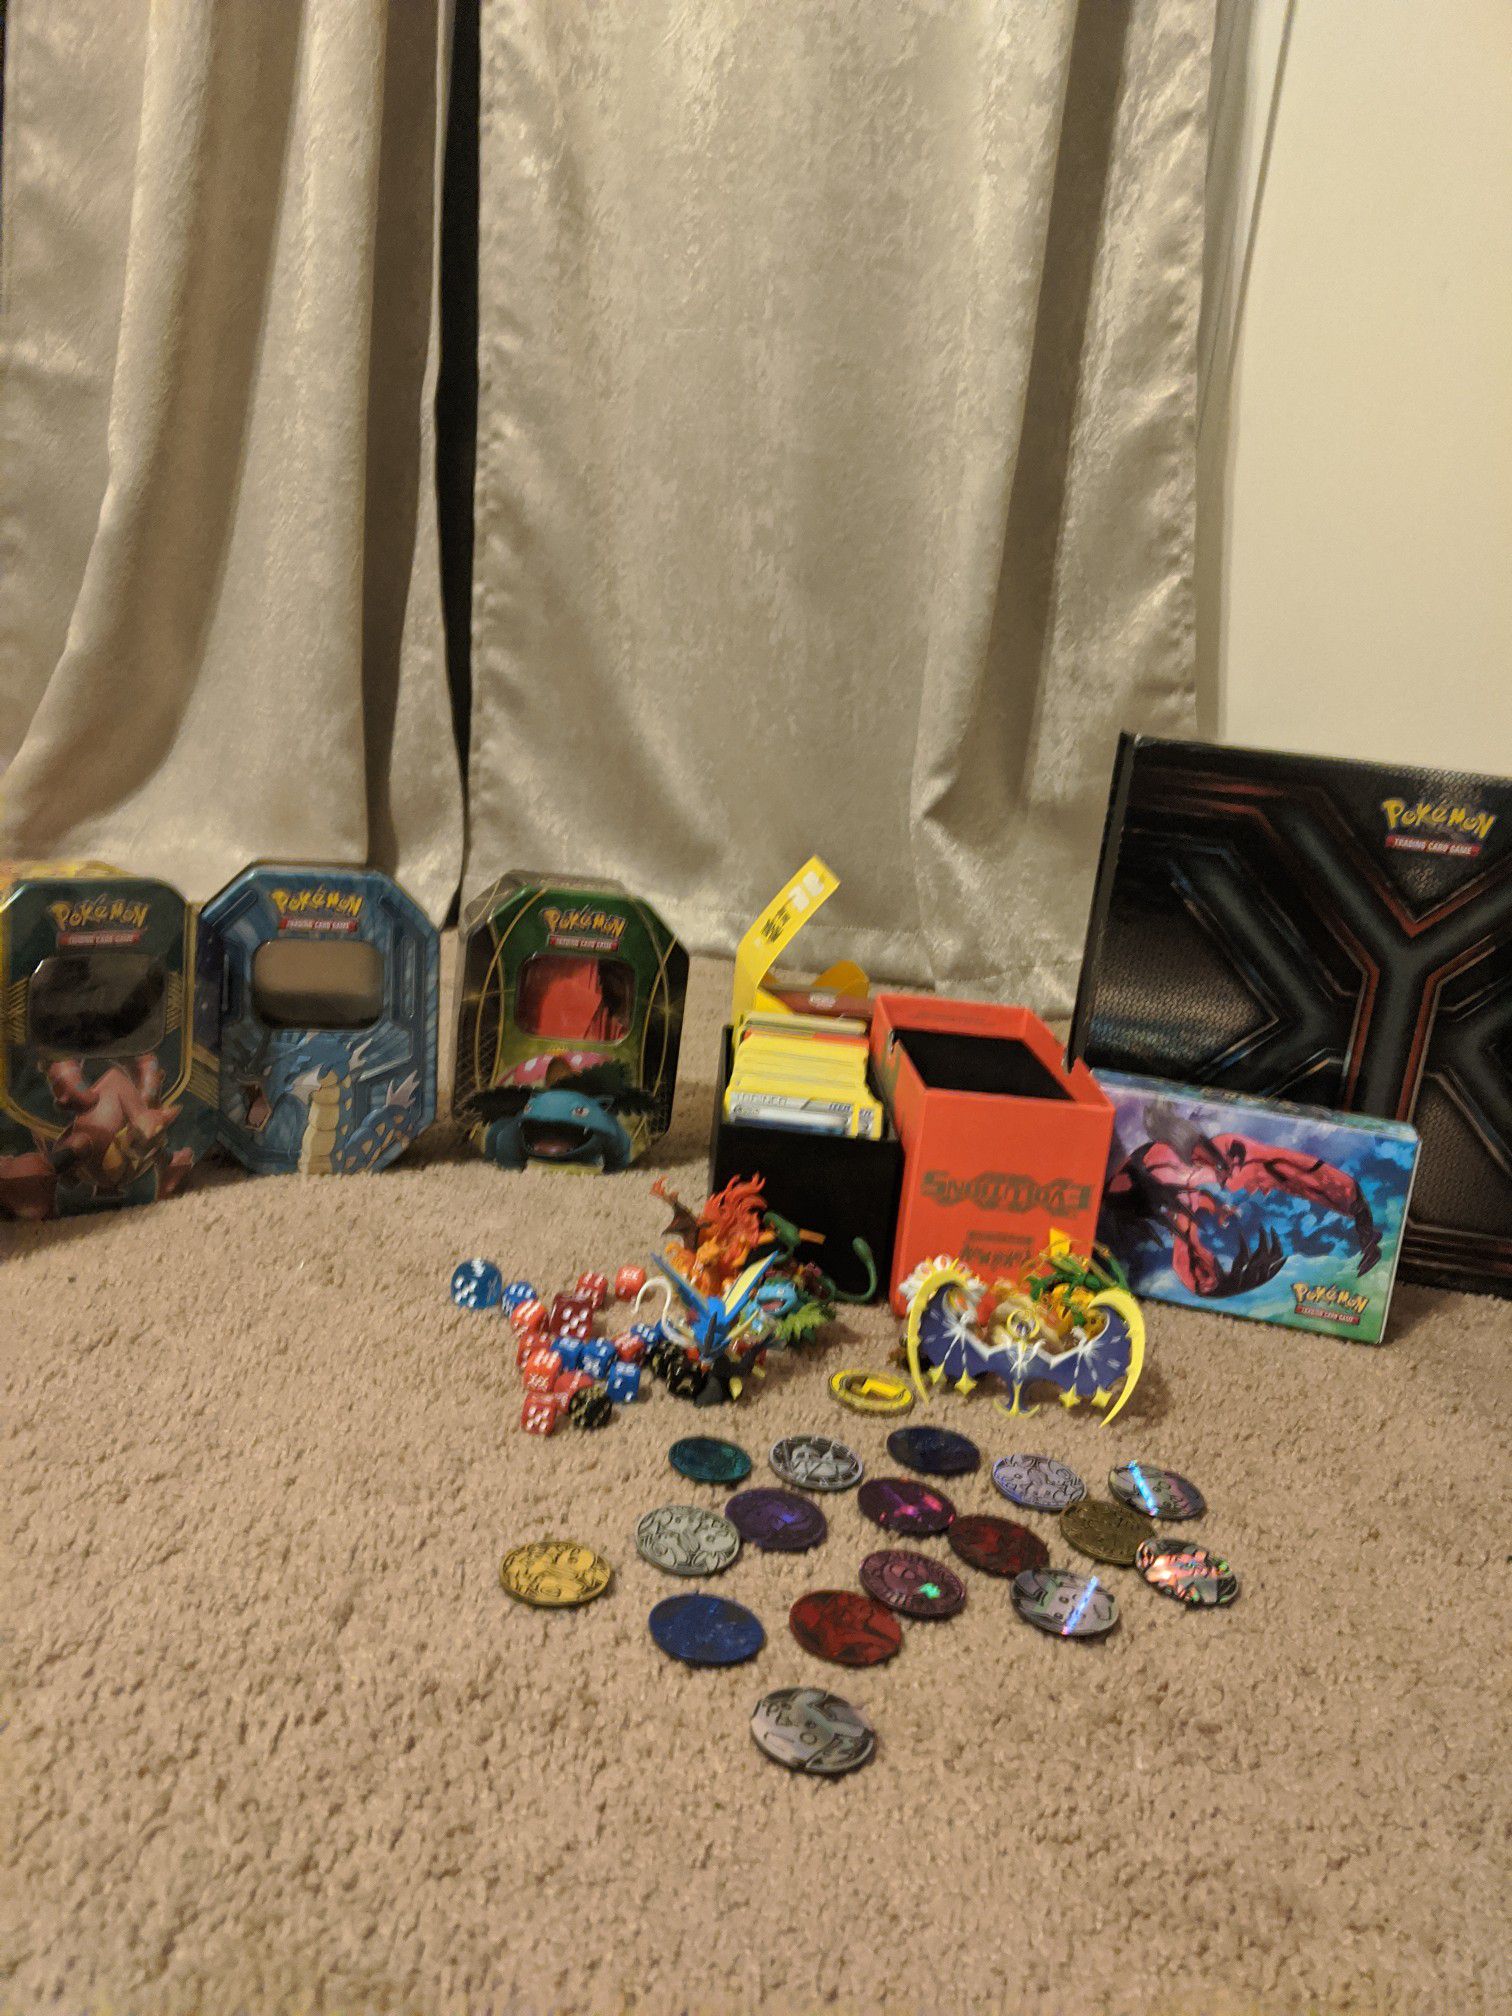 Giant Pokemon collection, thousands of new cards plus old school cards